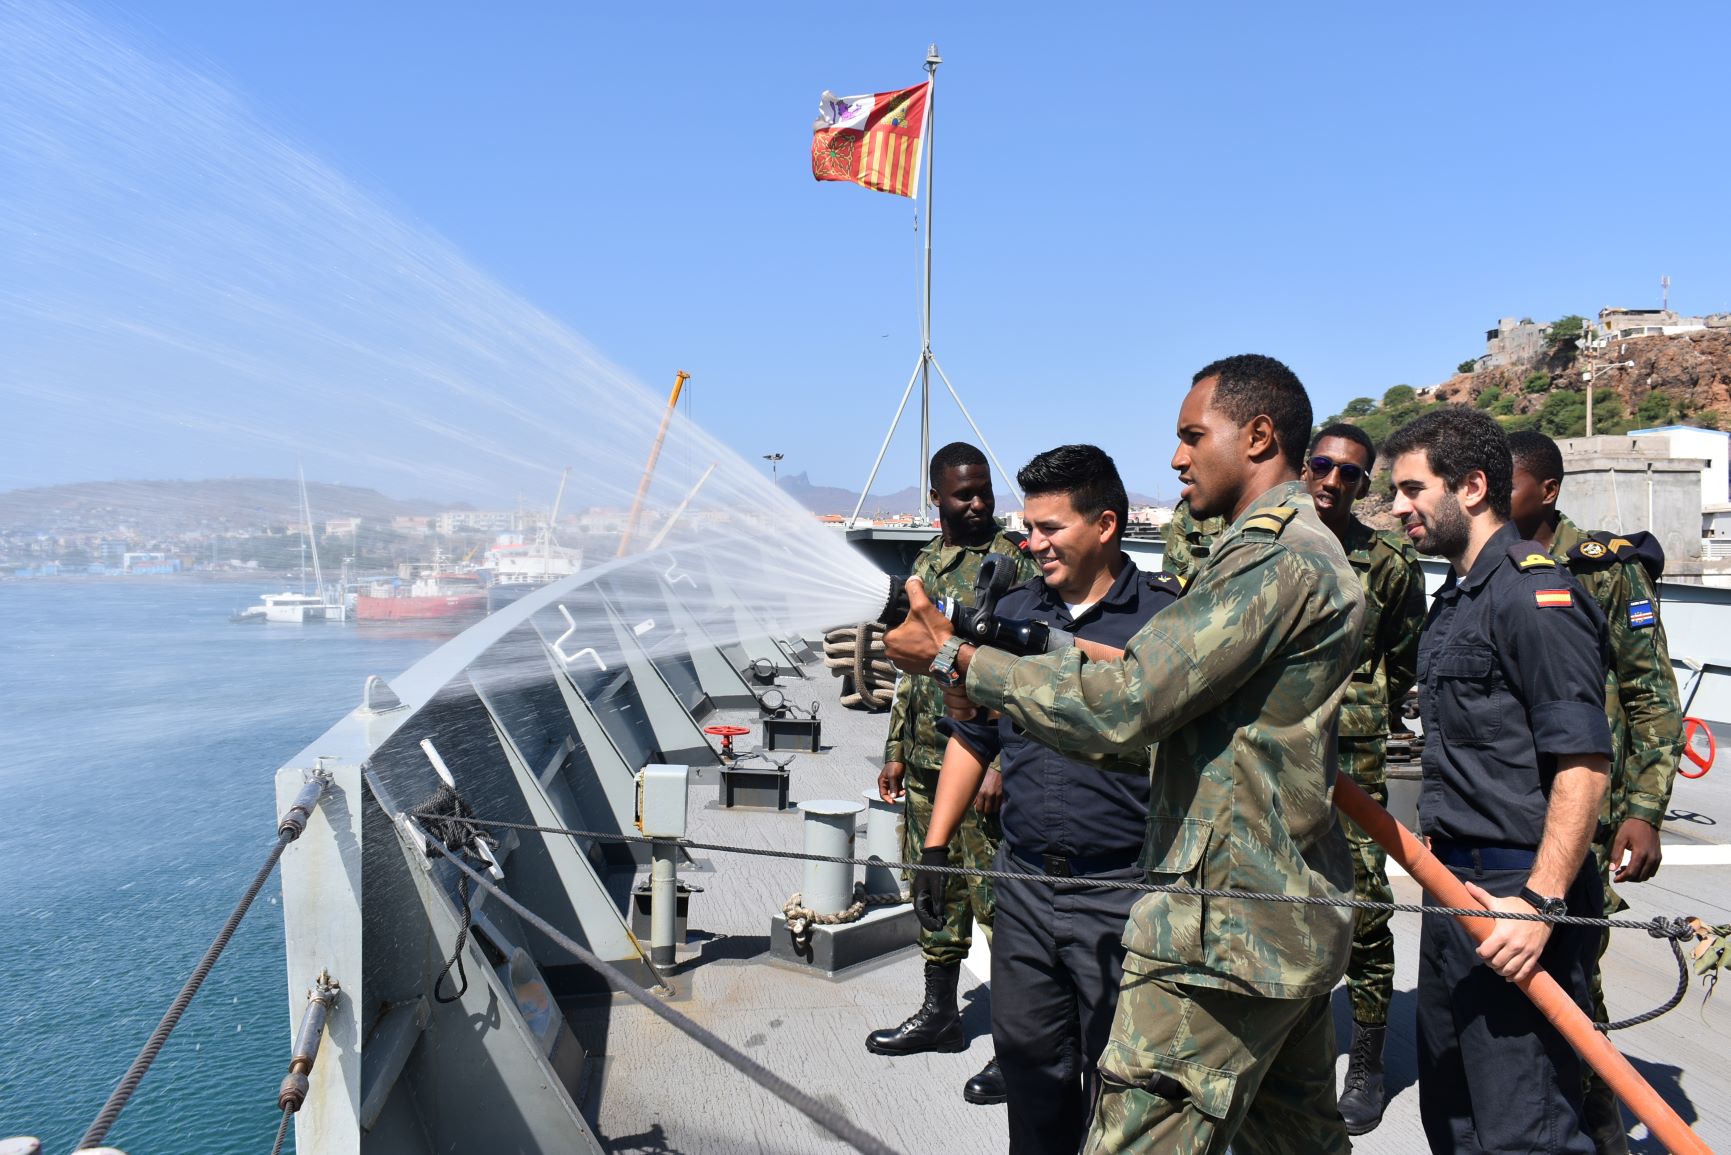 The patrol boat ‘Atalaya’ collaborates with the Armed Forces of Cape Verde in Praia